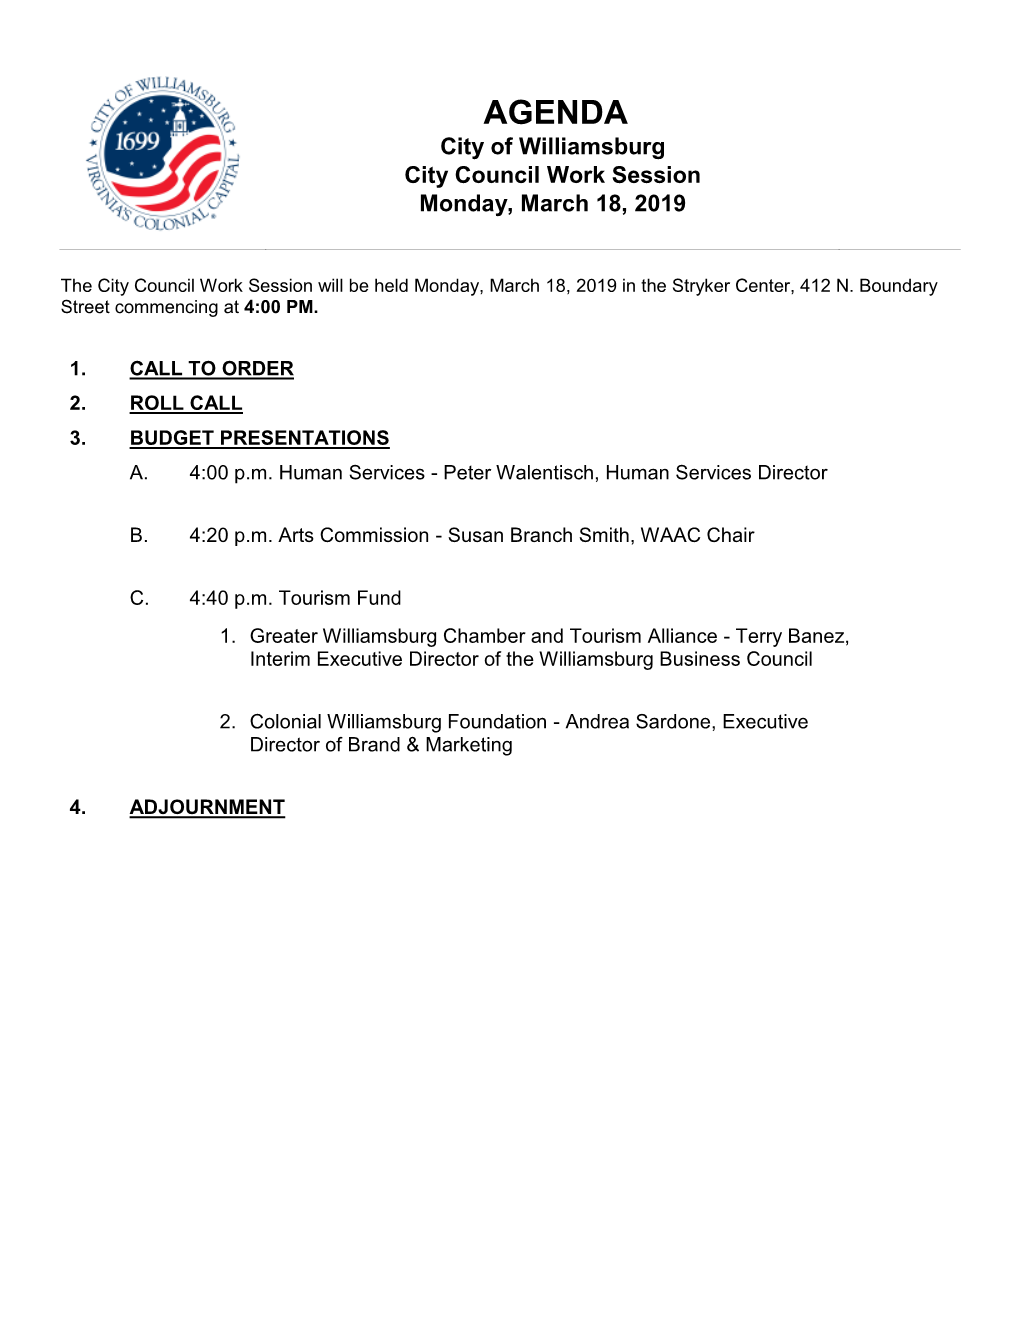 AGENDA City of Williamsburg City Council Work Session Monday, March 18, 2019